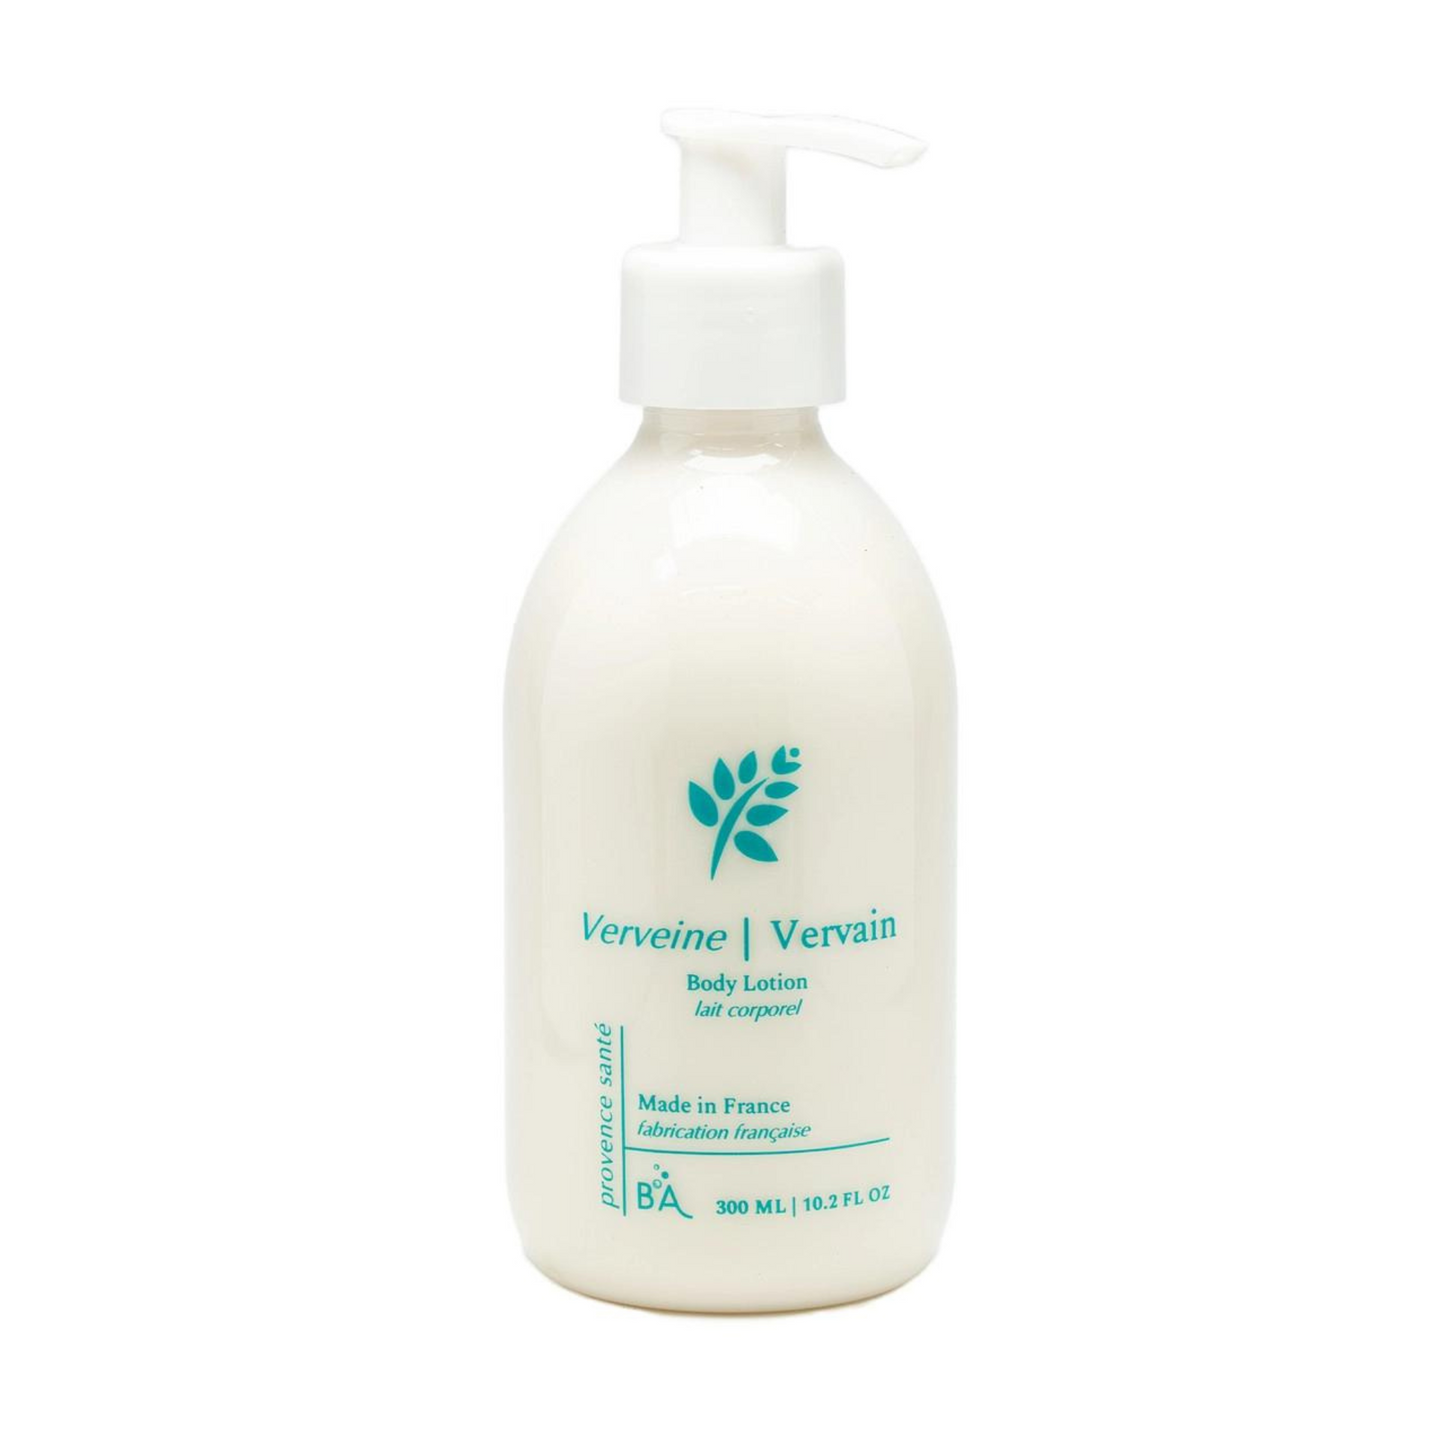 Primary image of Vervain Body Lotion